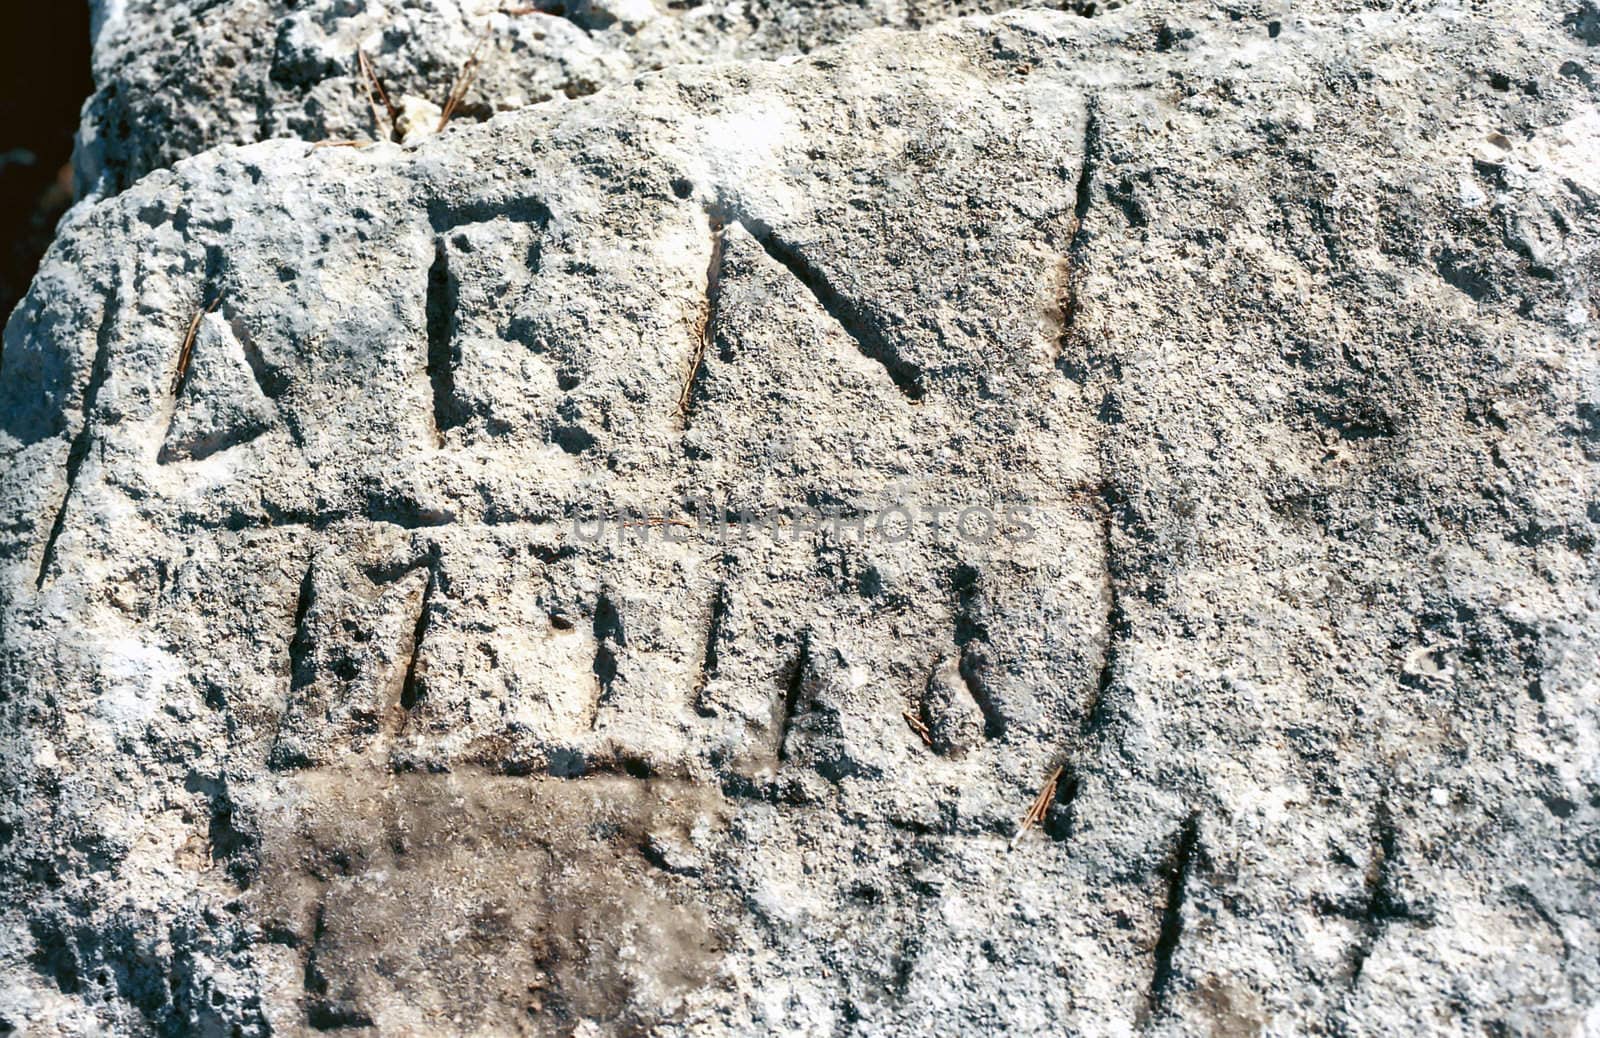  Background of ancient temple stone block with letters and figures